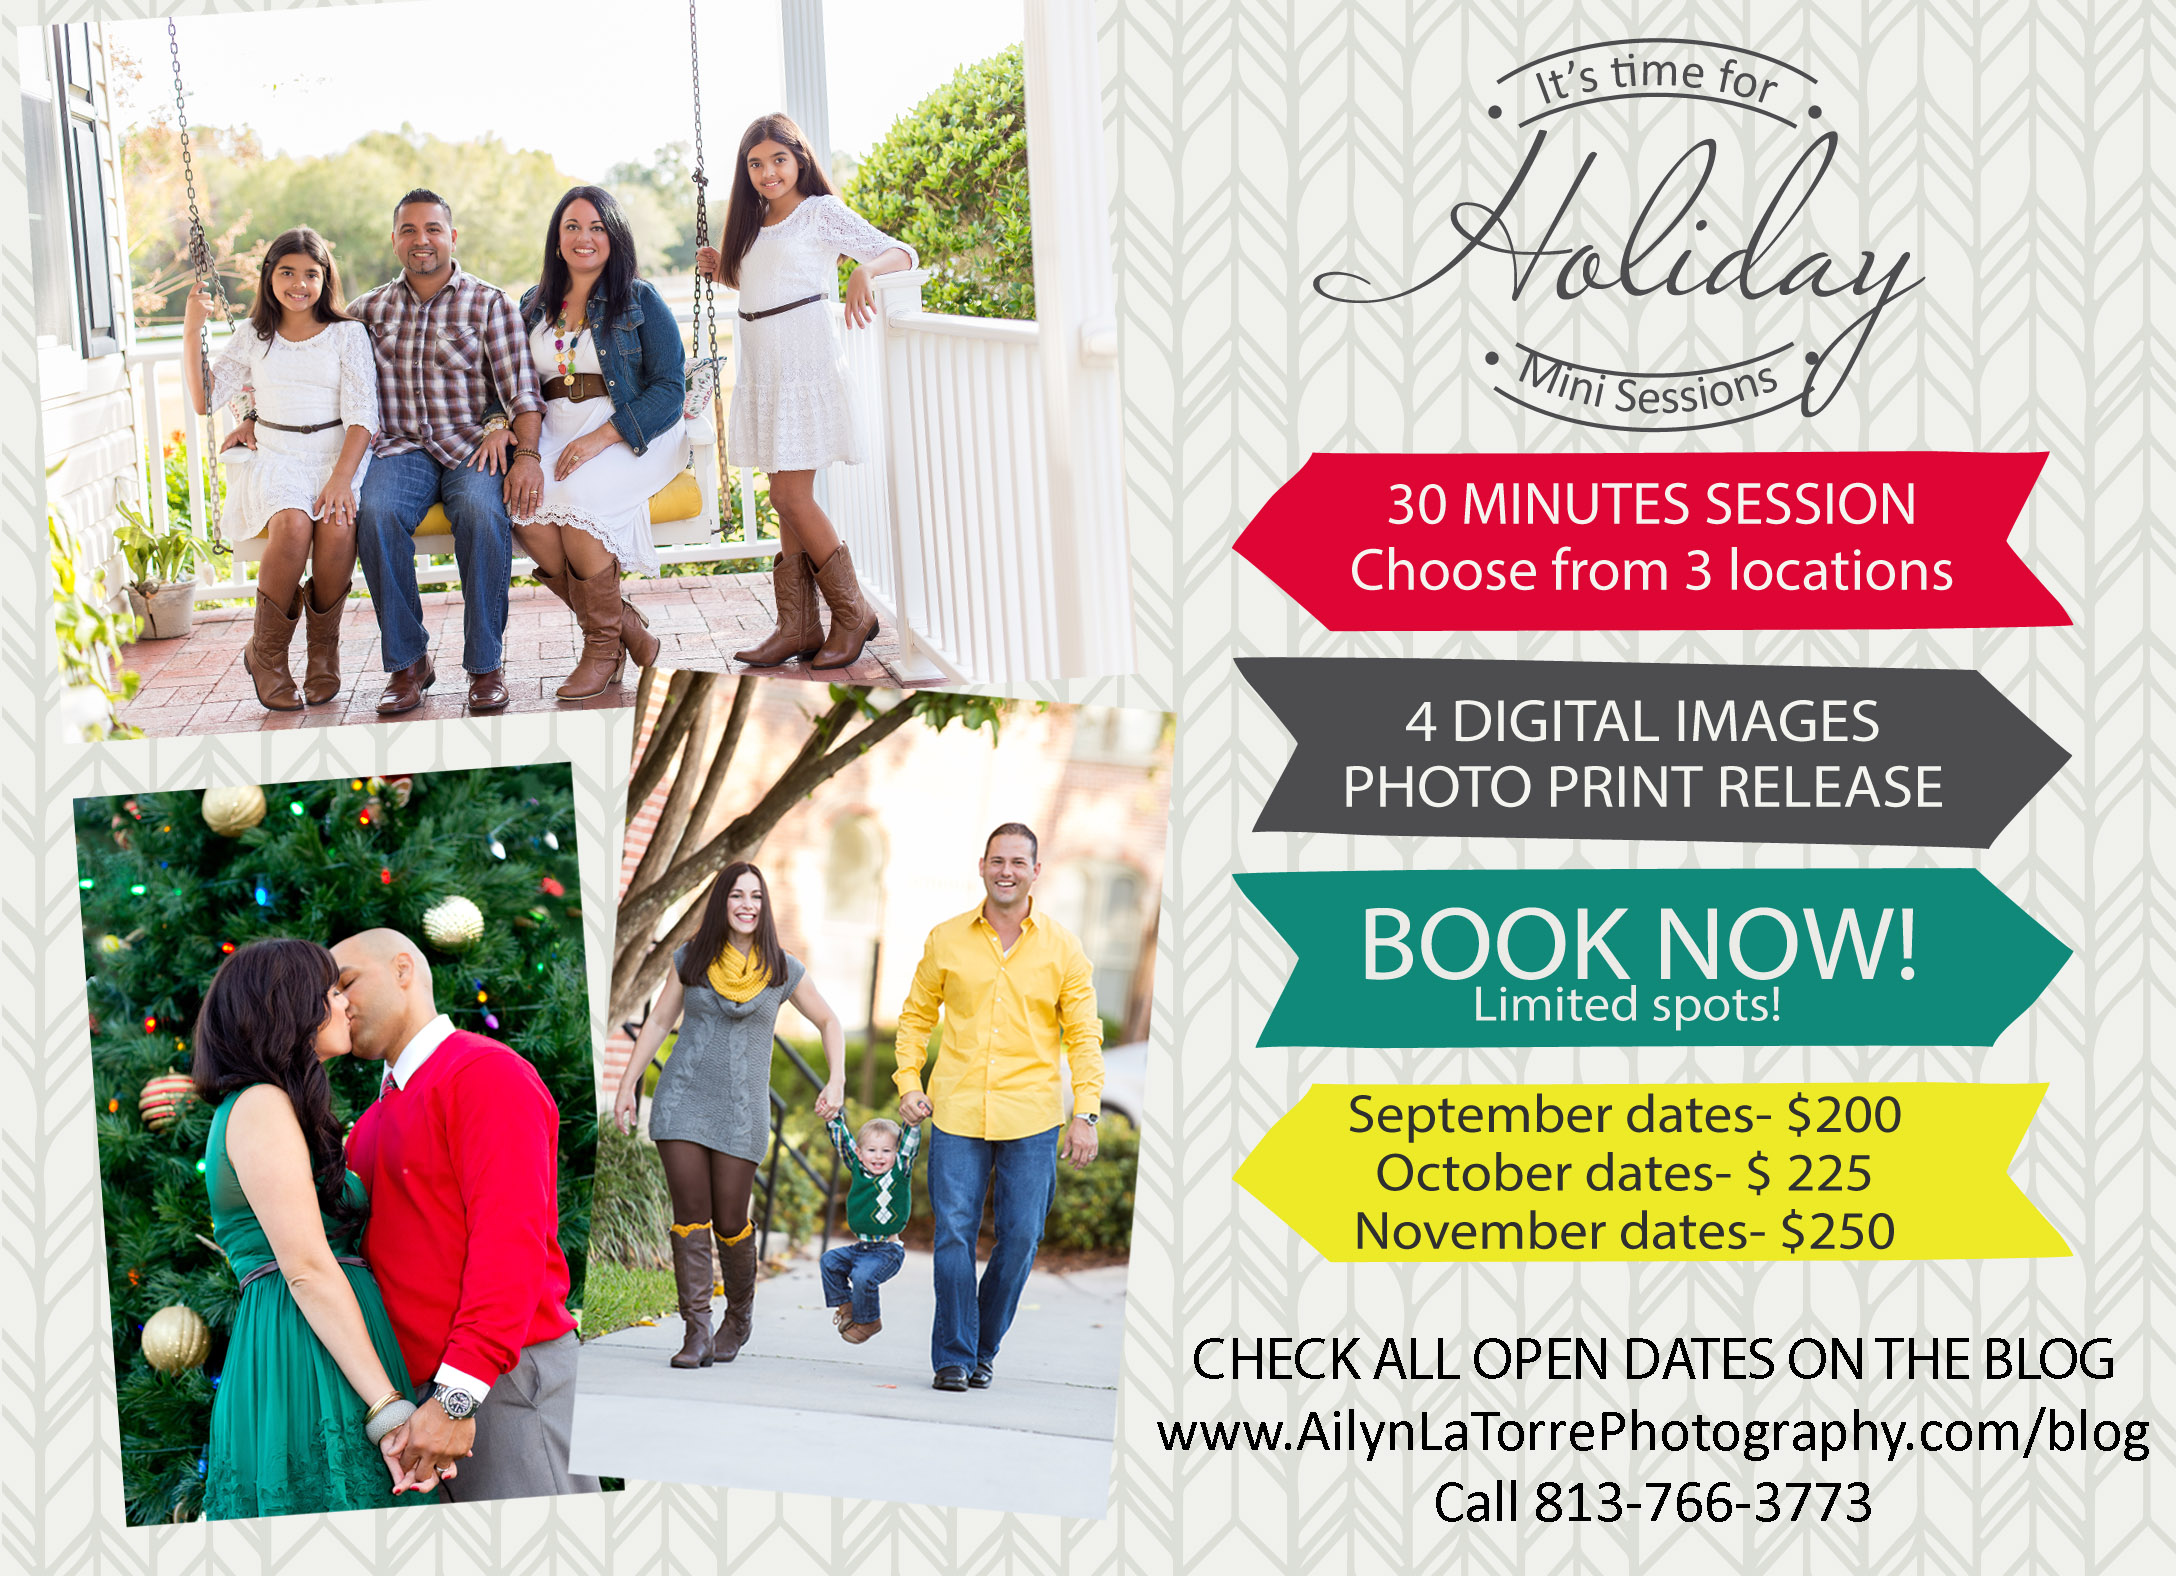 Holiday Mini Sessions 2014 | © Ailyn La Torre Photography 2014